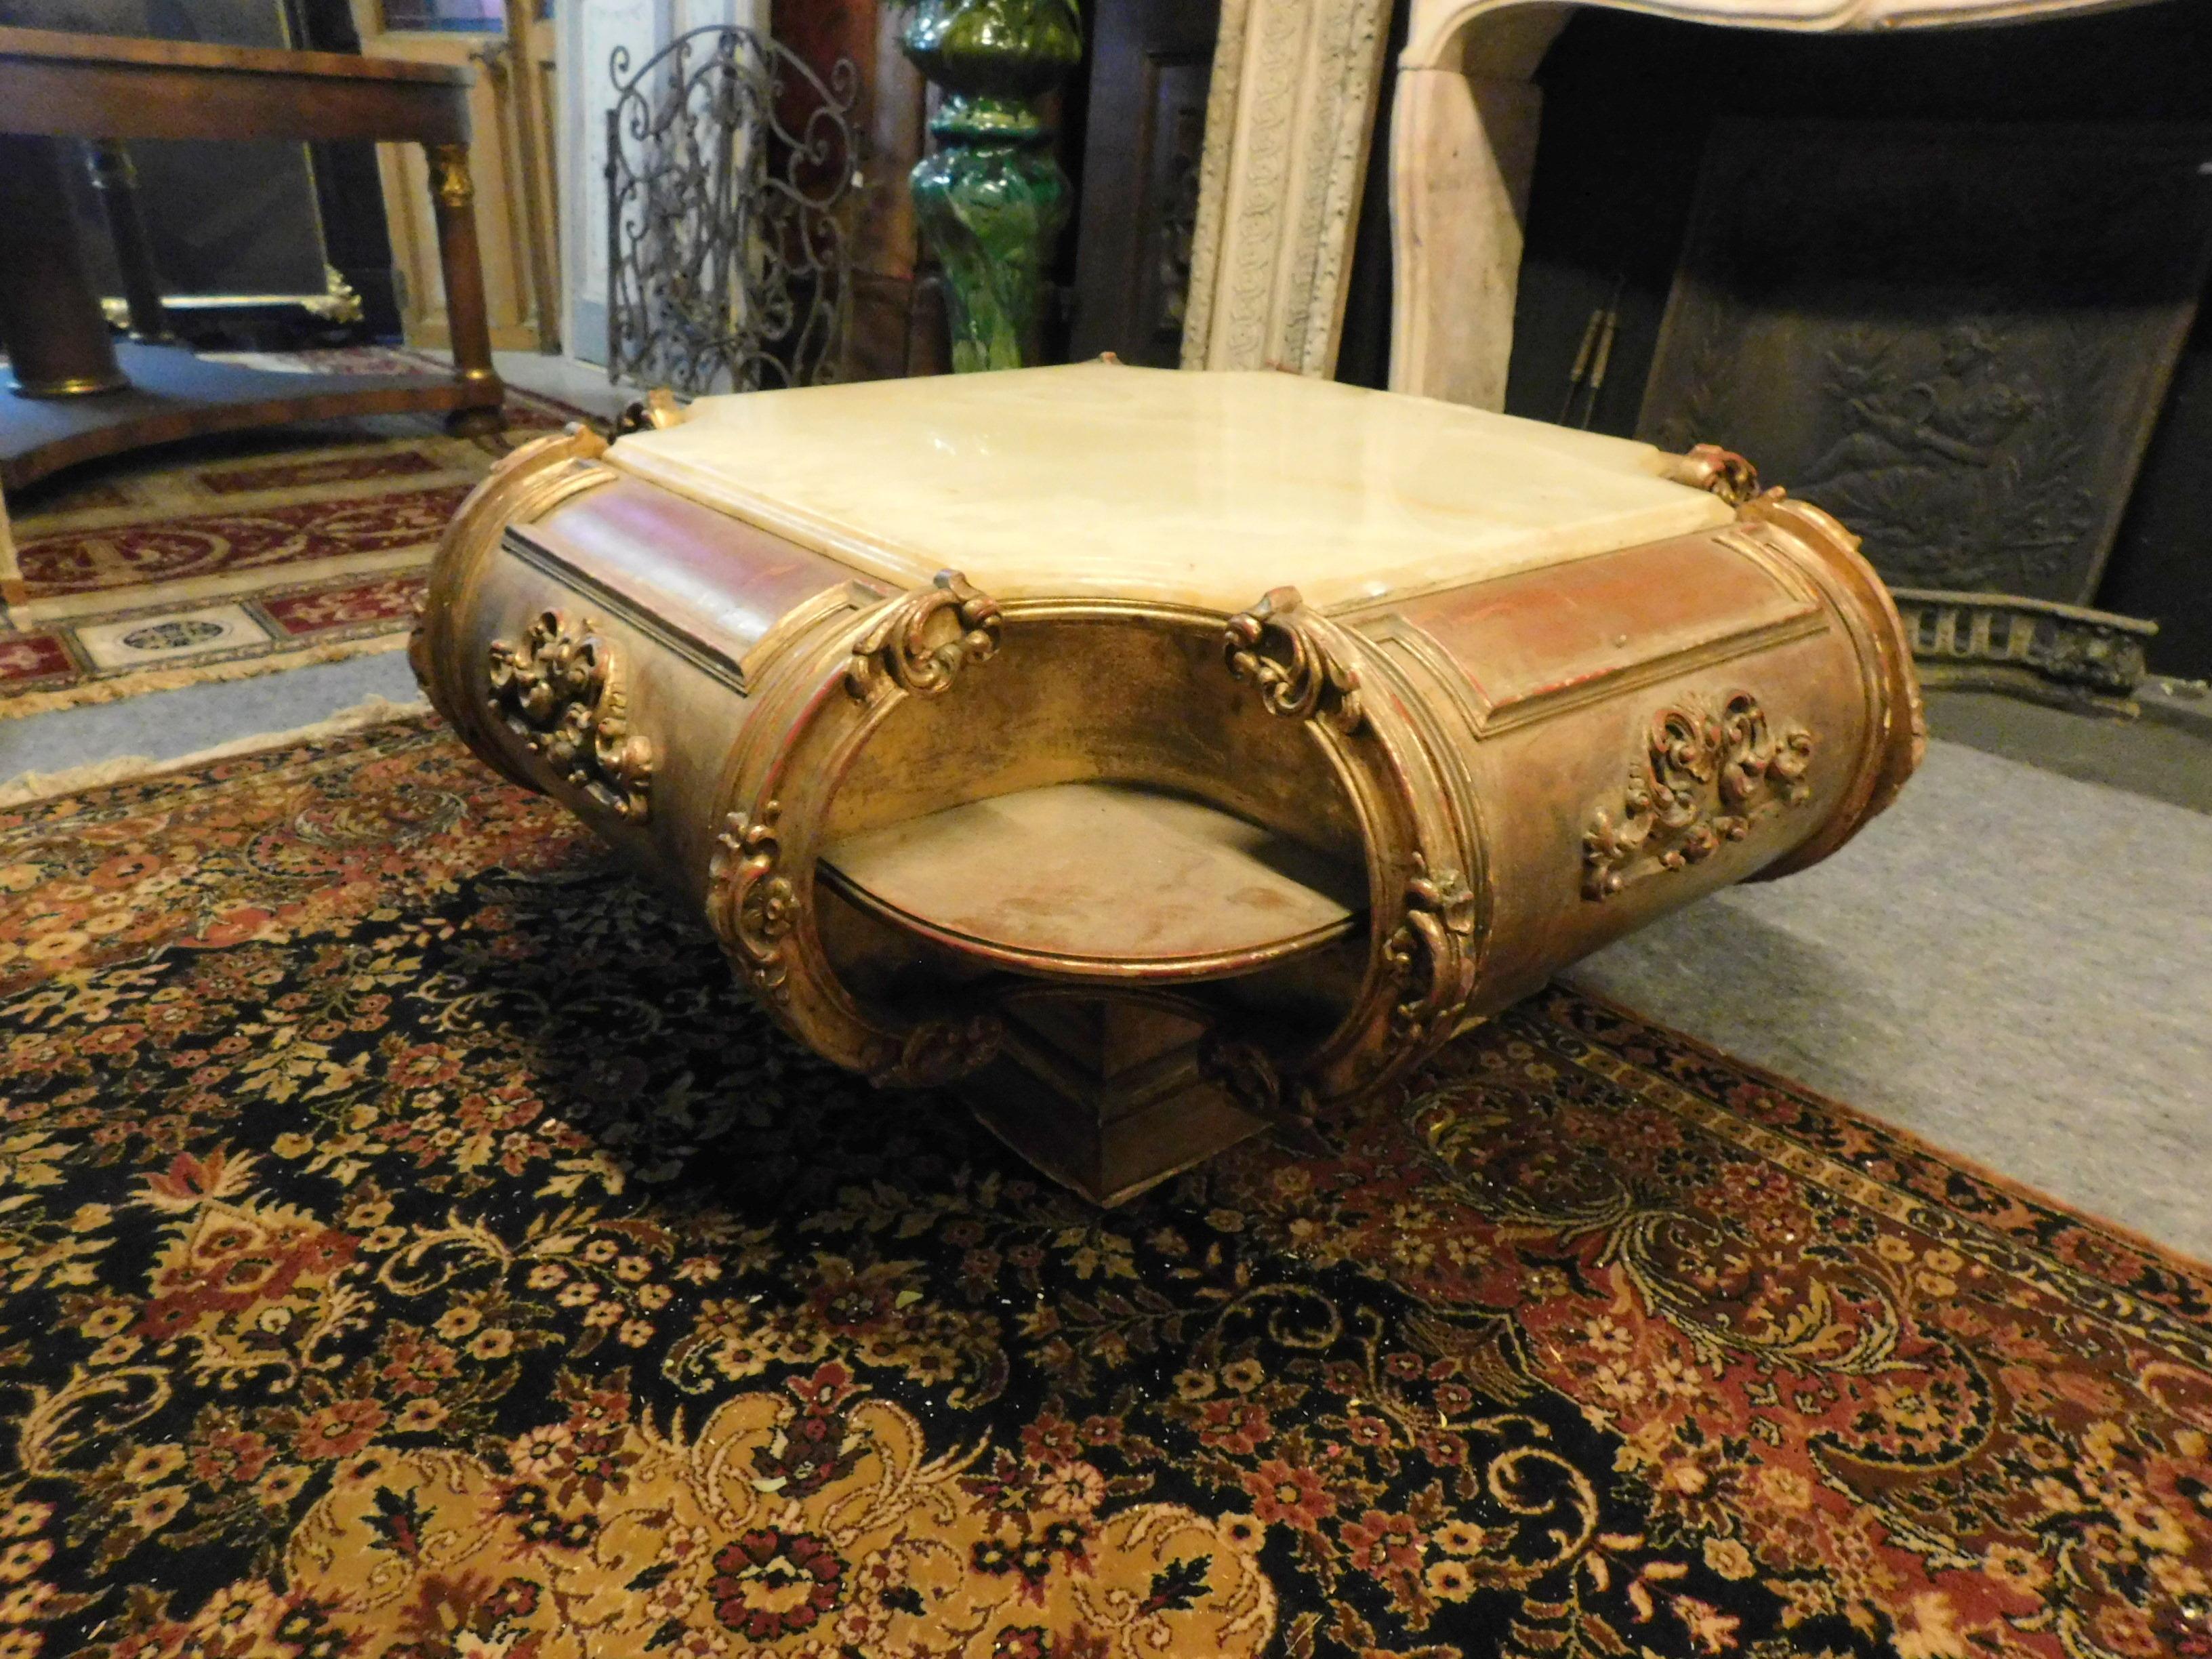 Vintage low table, ideal for the living room or next to a sofa, antique gilded and sculpted on the rounded sides, with yellow marble top, built at the beginning of the 20th century in Italy.